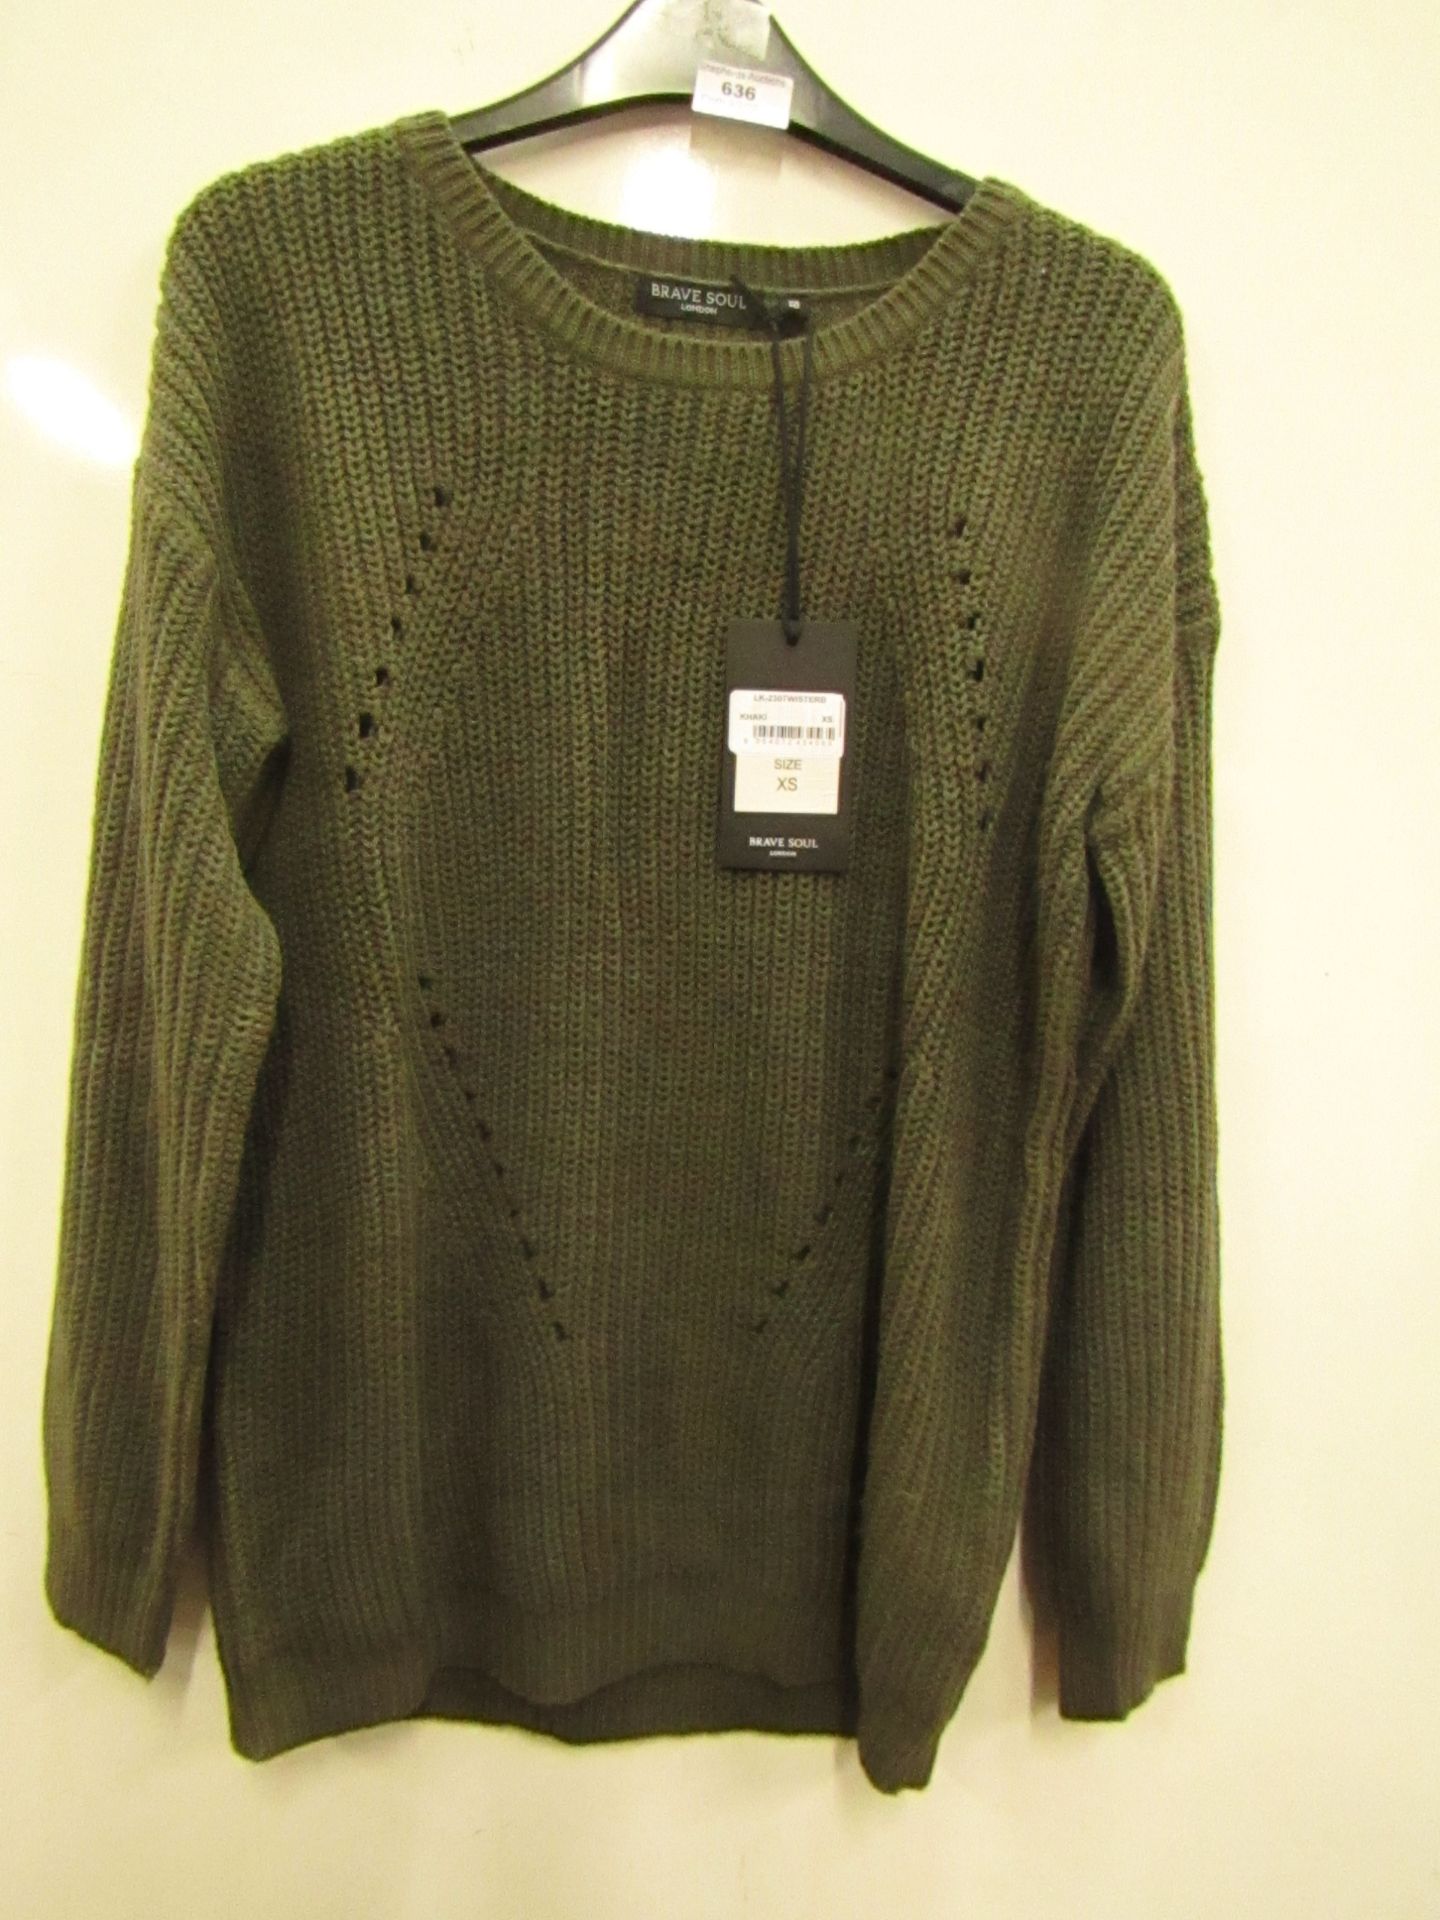 Brave Soul Ladies Jumper size 10 new with tag